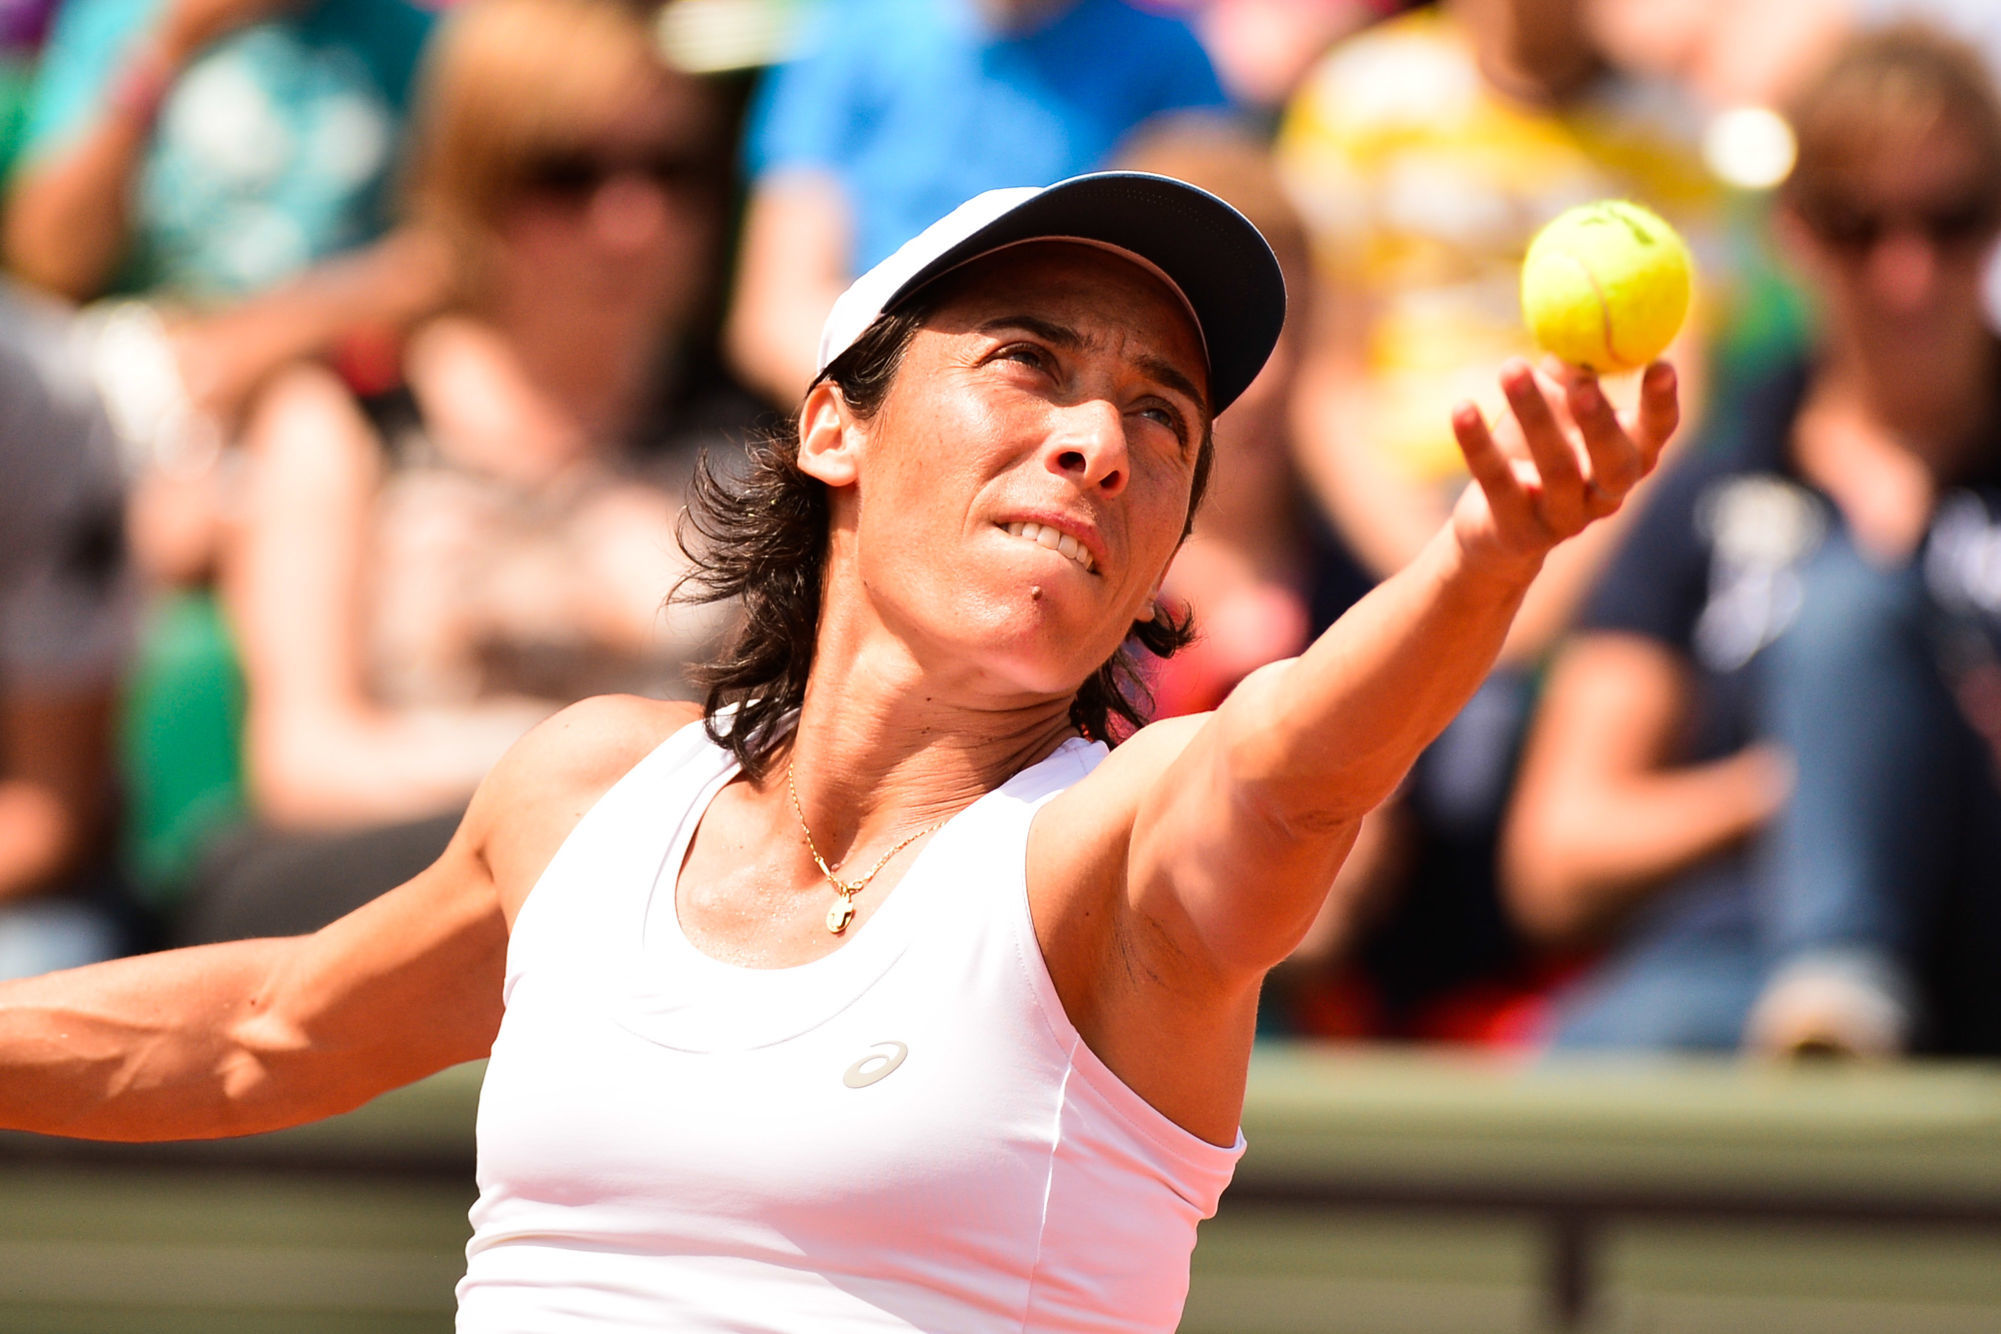 Francesca Schiavone plays an exhibition match at Kids' Day during the French Open 2016 on May 21, 2016 in Paris, France. (Photo by Dave Winter/Icon Sport)